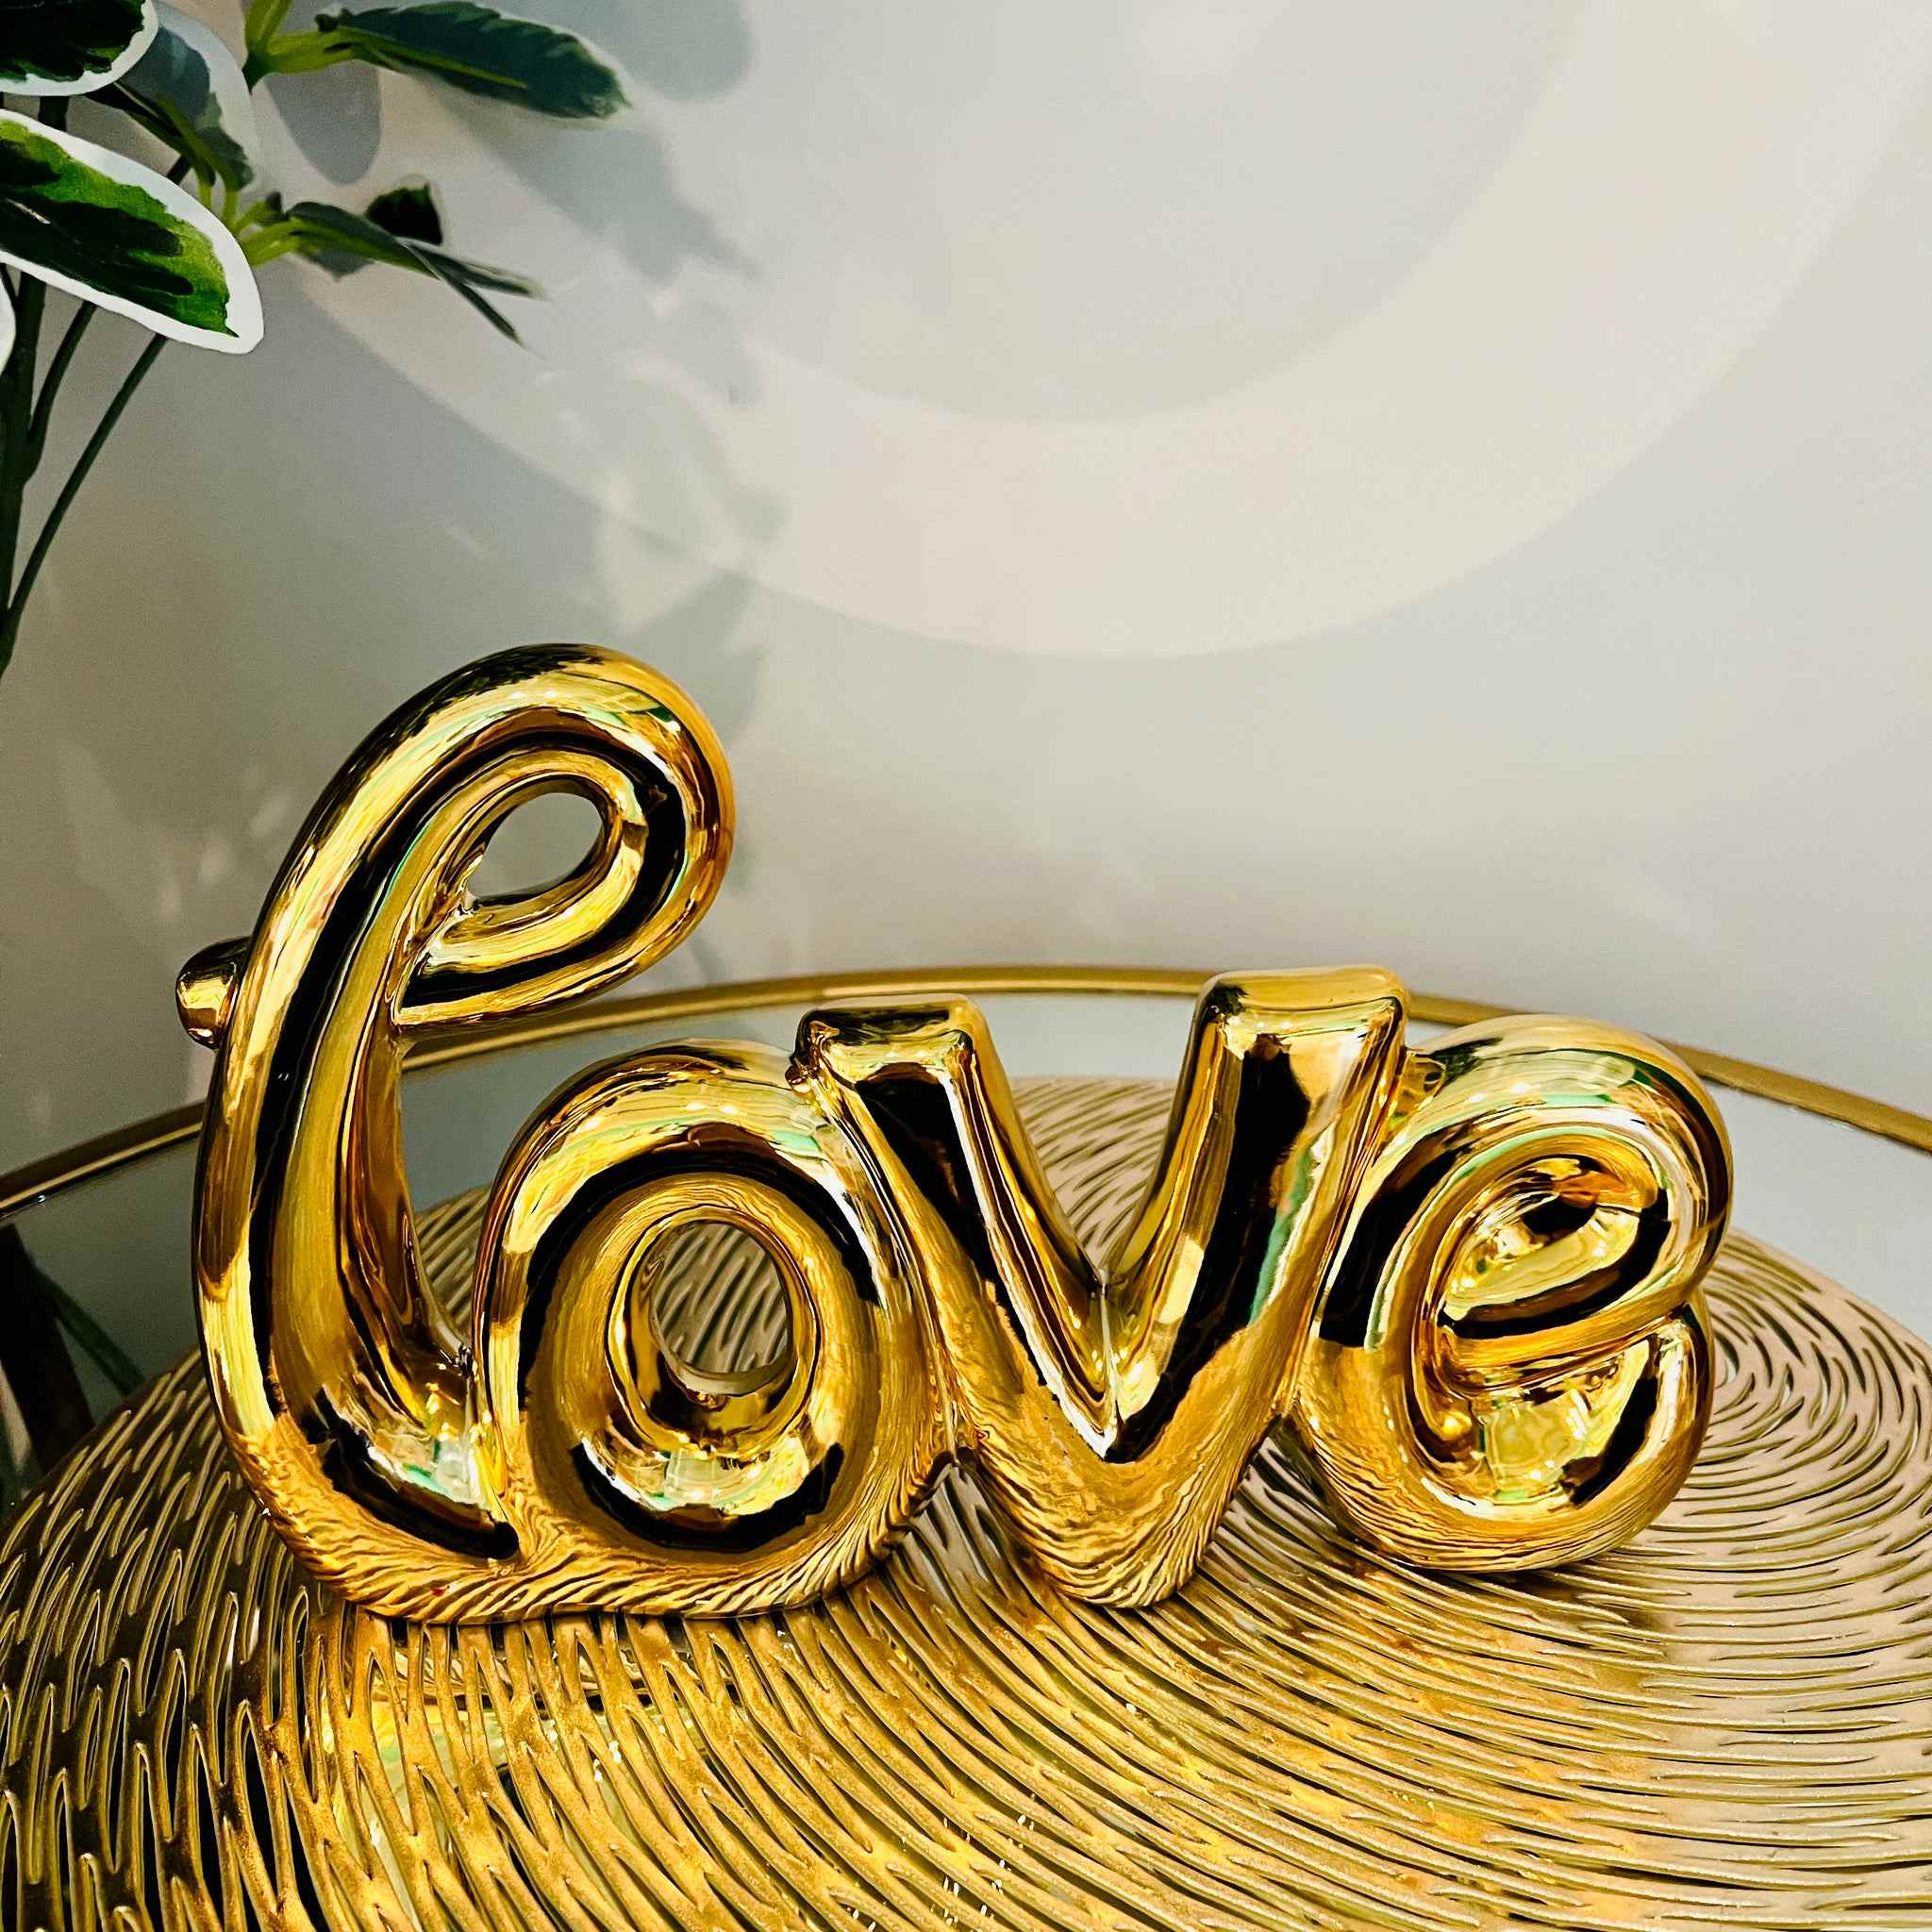 LOVE Letter Sign Centre Piece in Gold Metal for Table Top